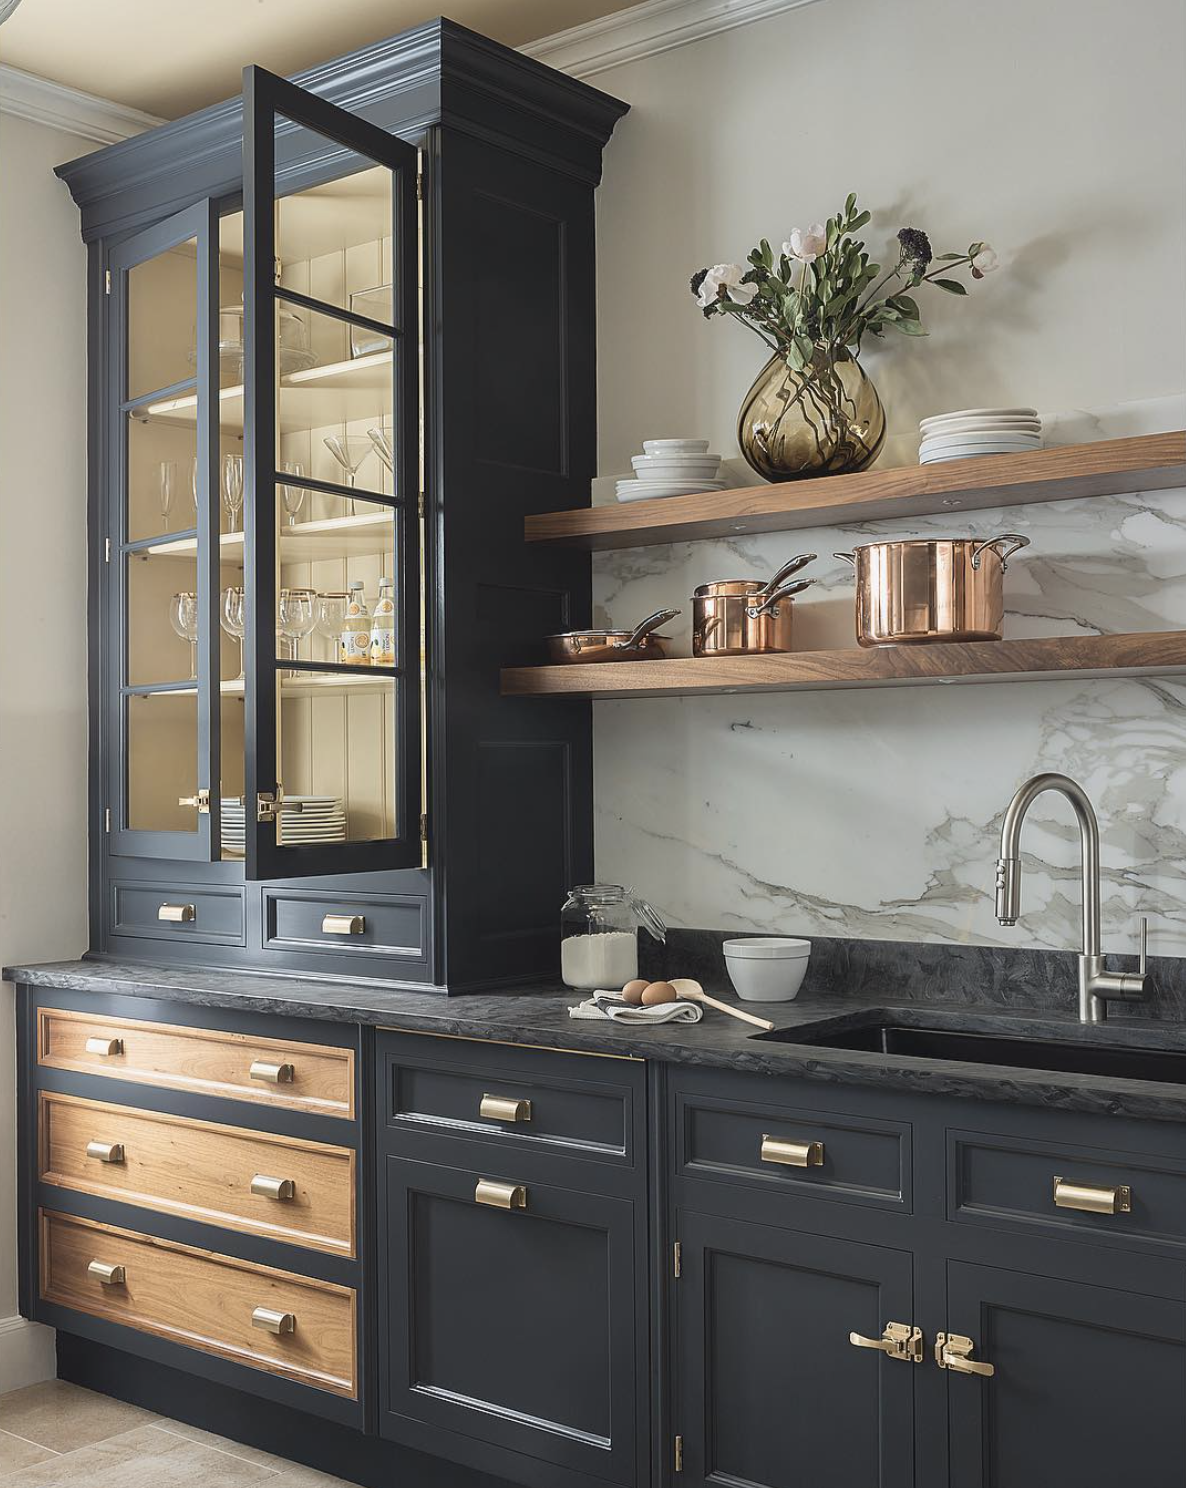 25 Blue Kitchen Cabinet Ideas That Are Stylish and Refreshing